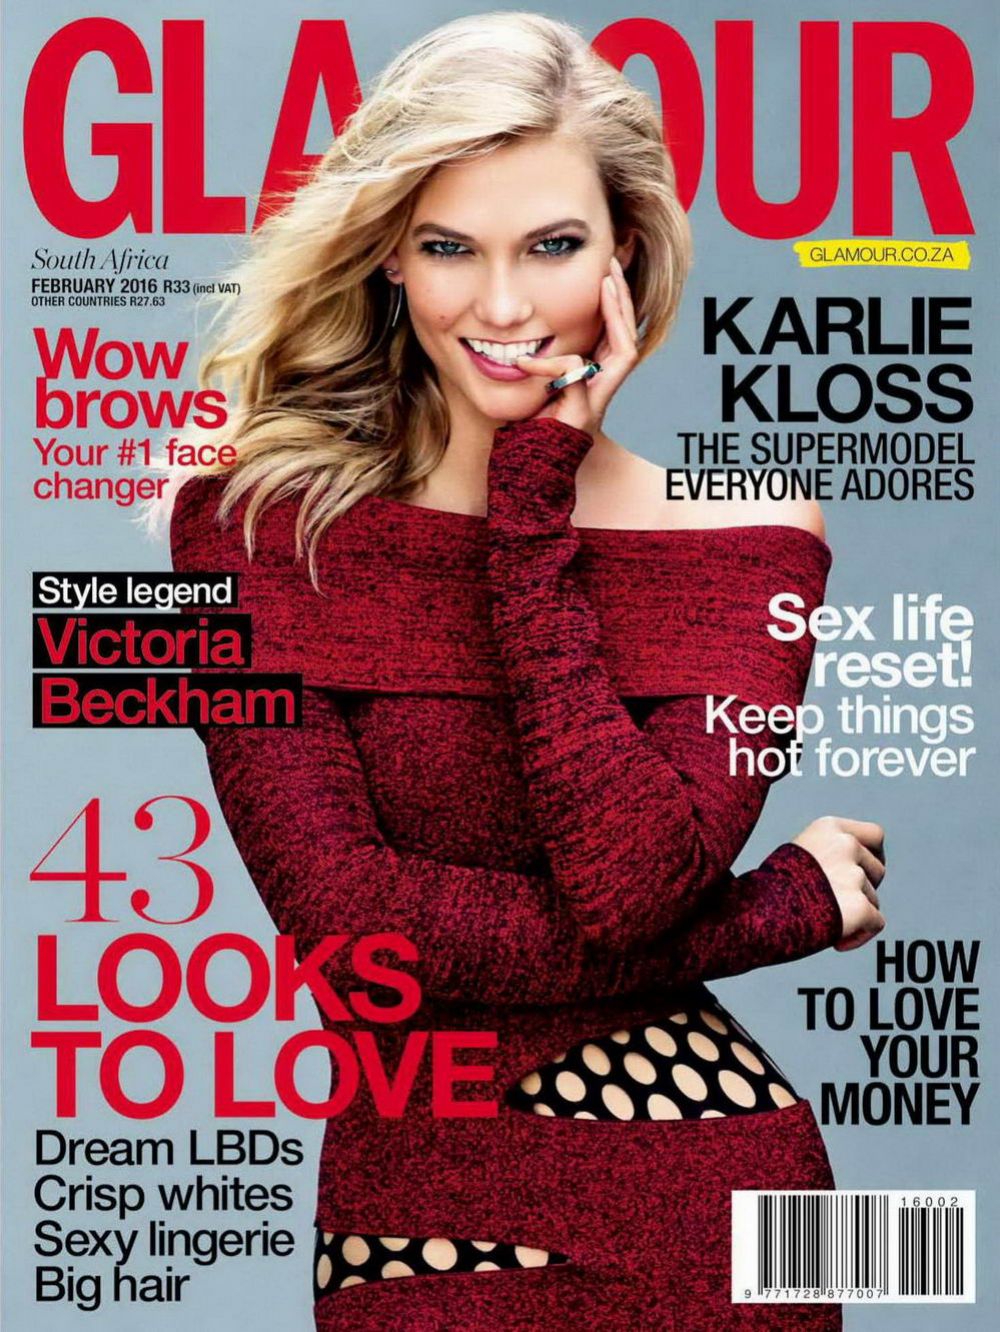 KARLIE KLOSS in Glamour Magazine, South Africa February 2016 Issue ...